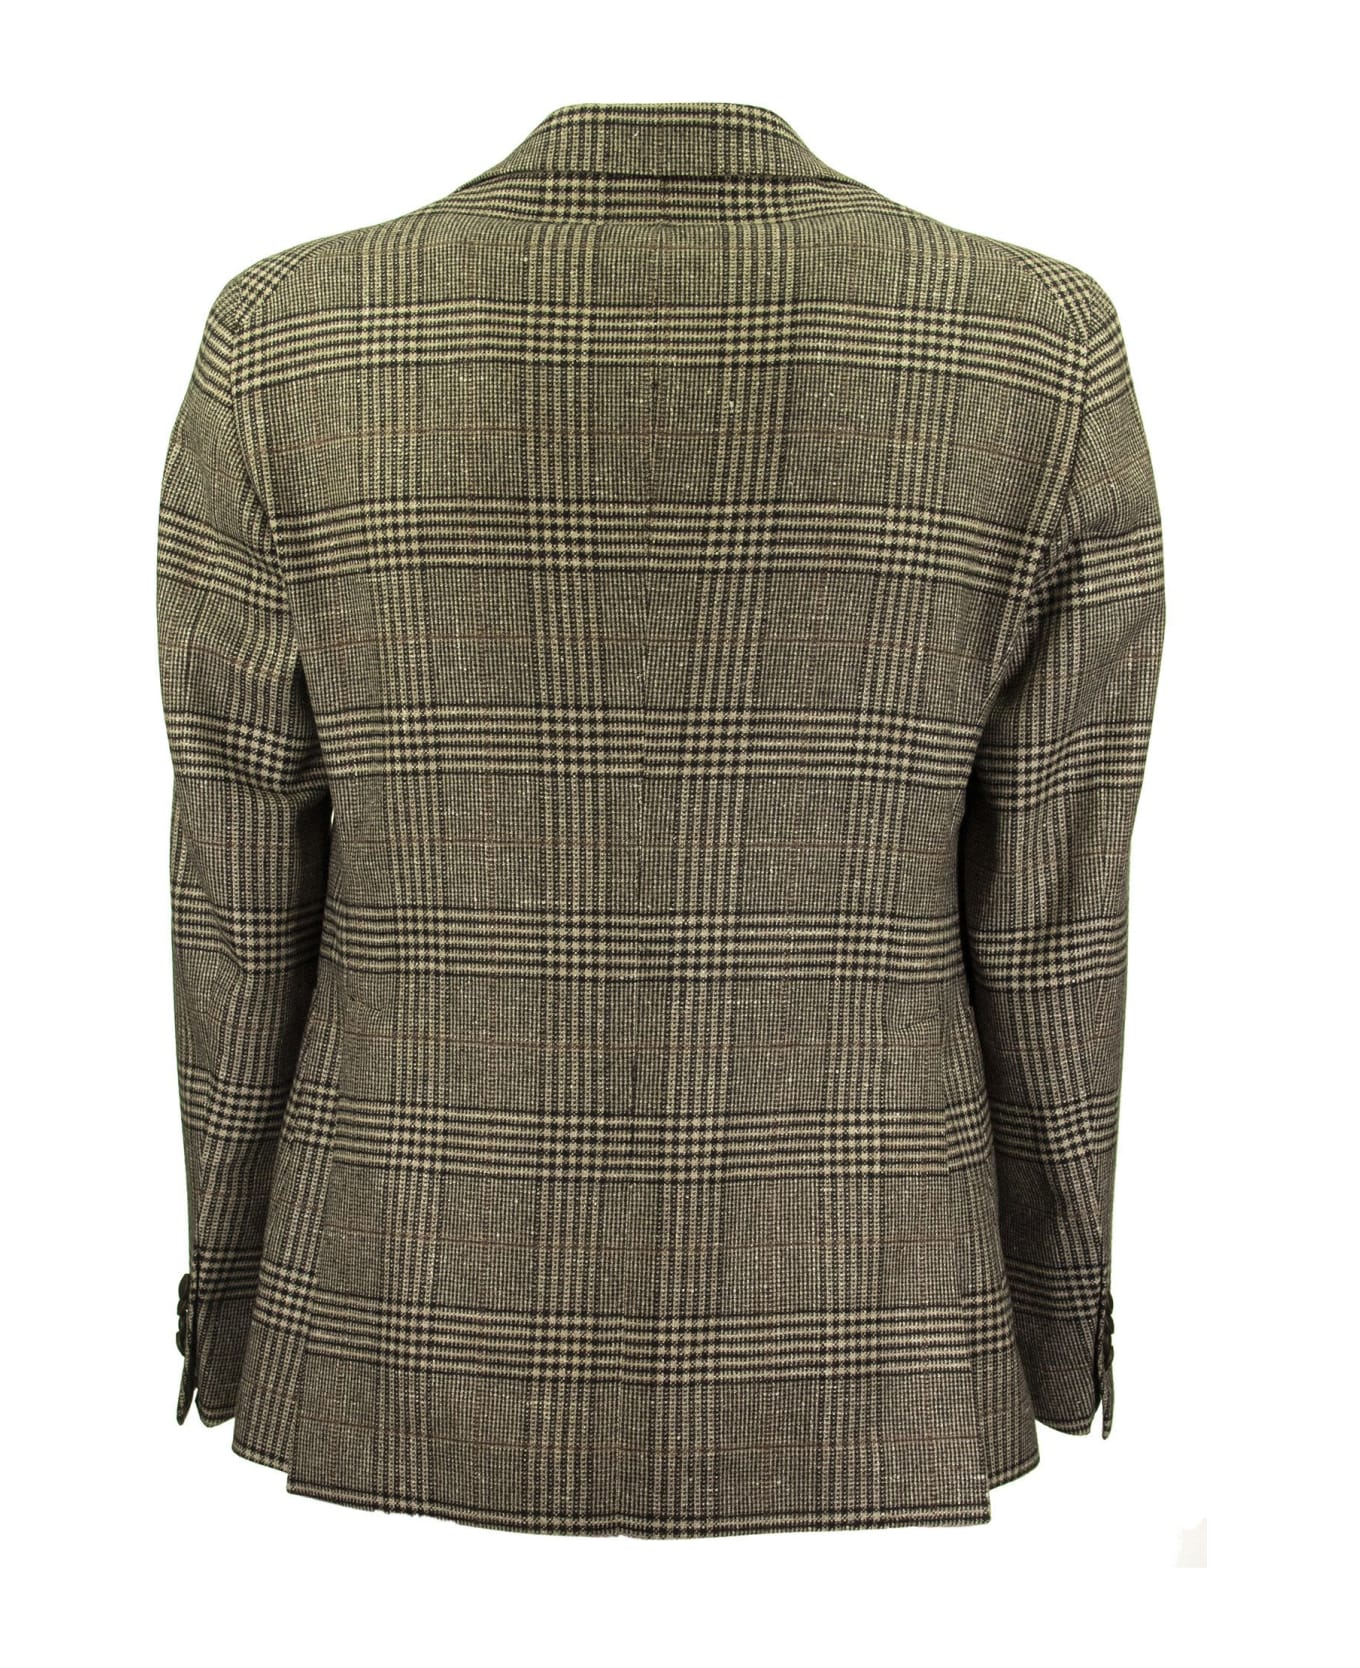 Tagliatore Prince Of Wales Jacket In Wool, Silk And Cashmere - Brown/beige